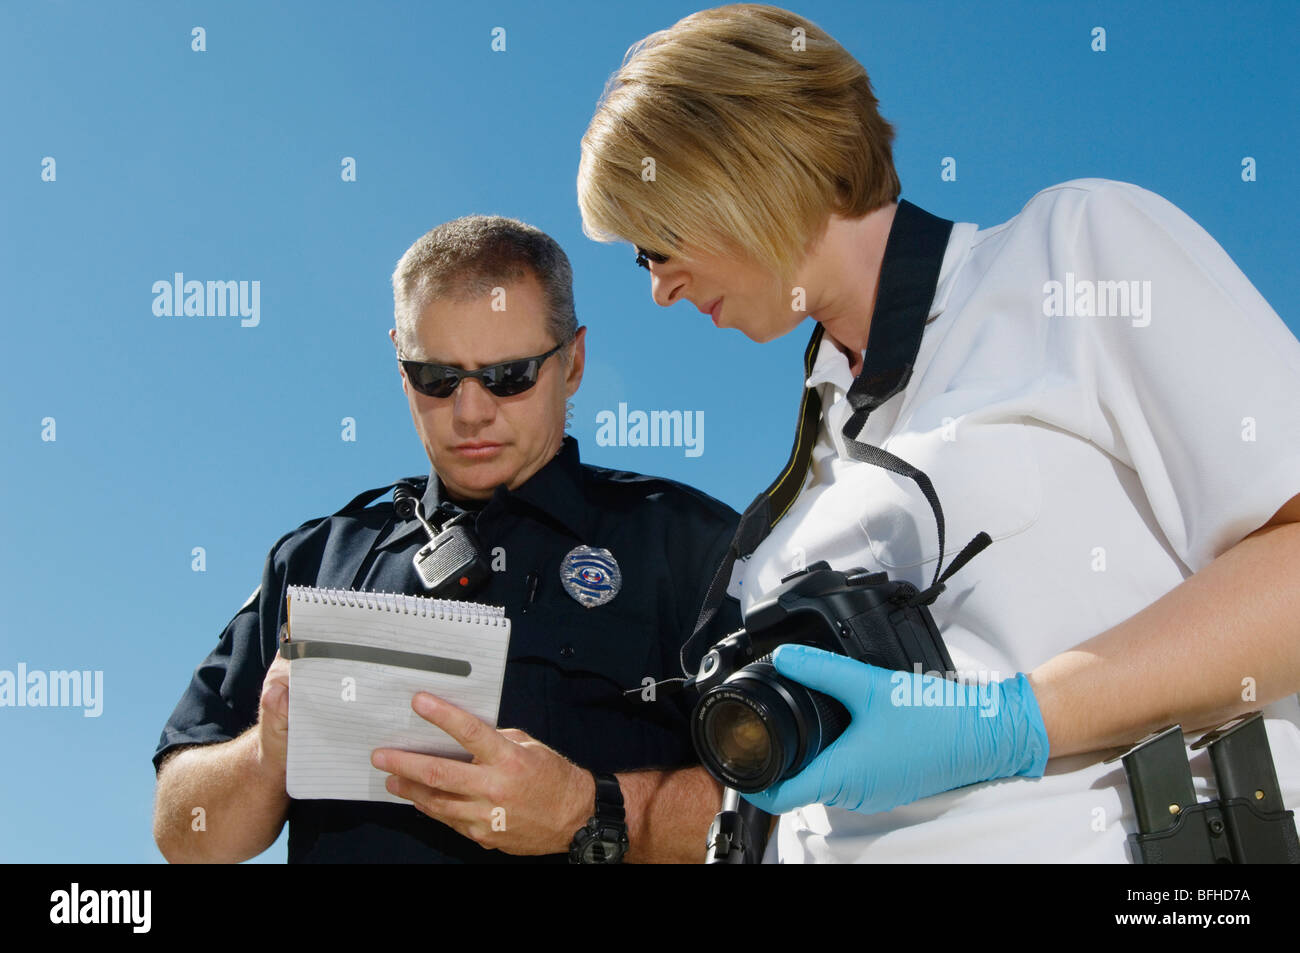 Police Officer and Investigator with Camera Stock Photo